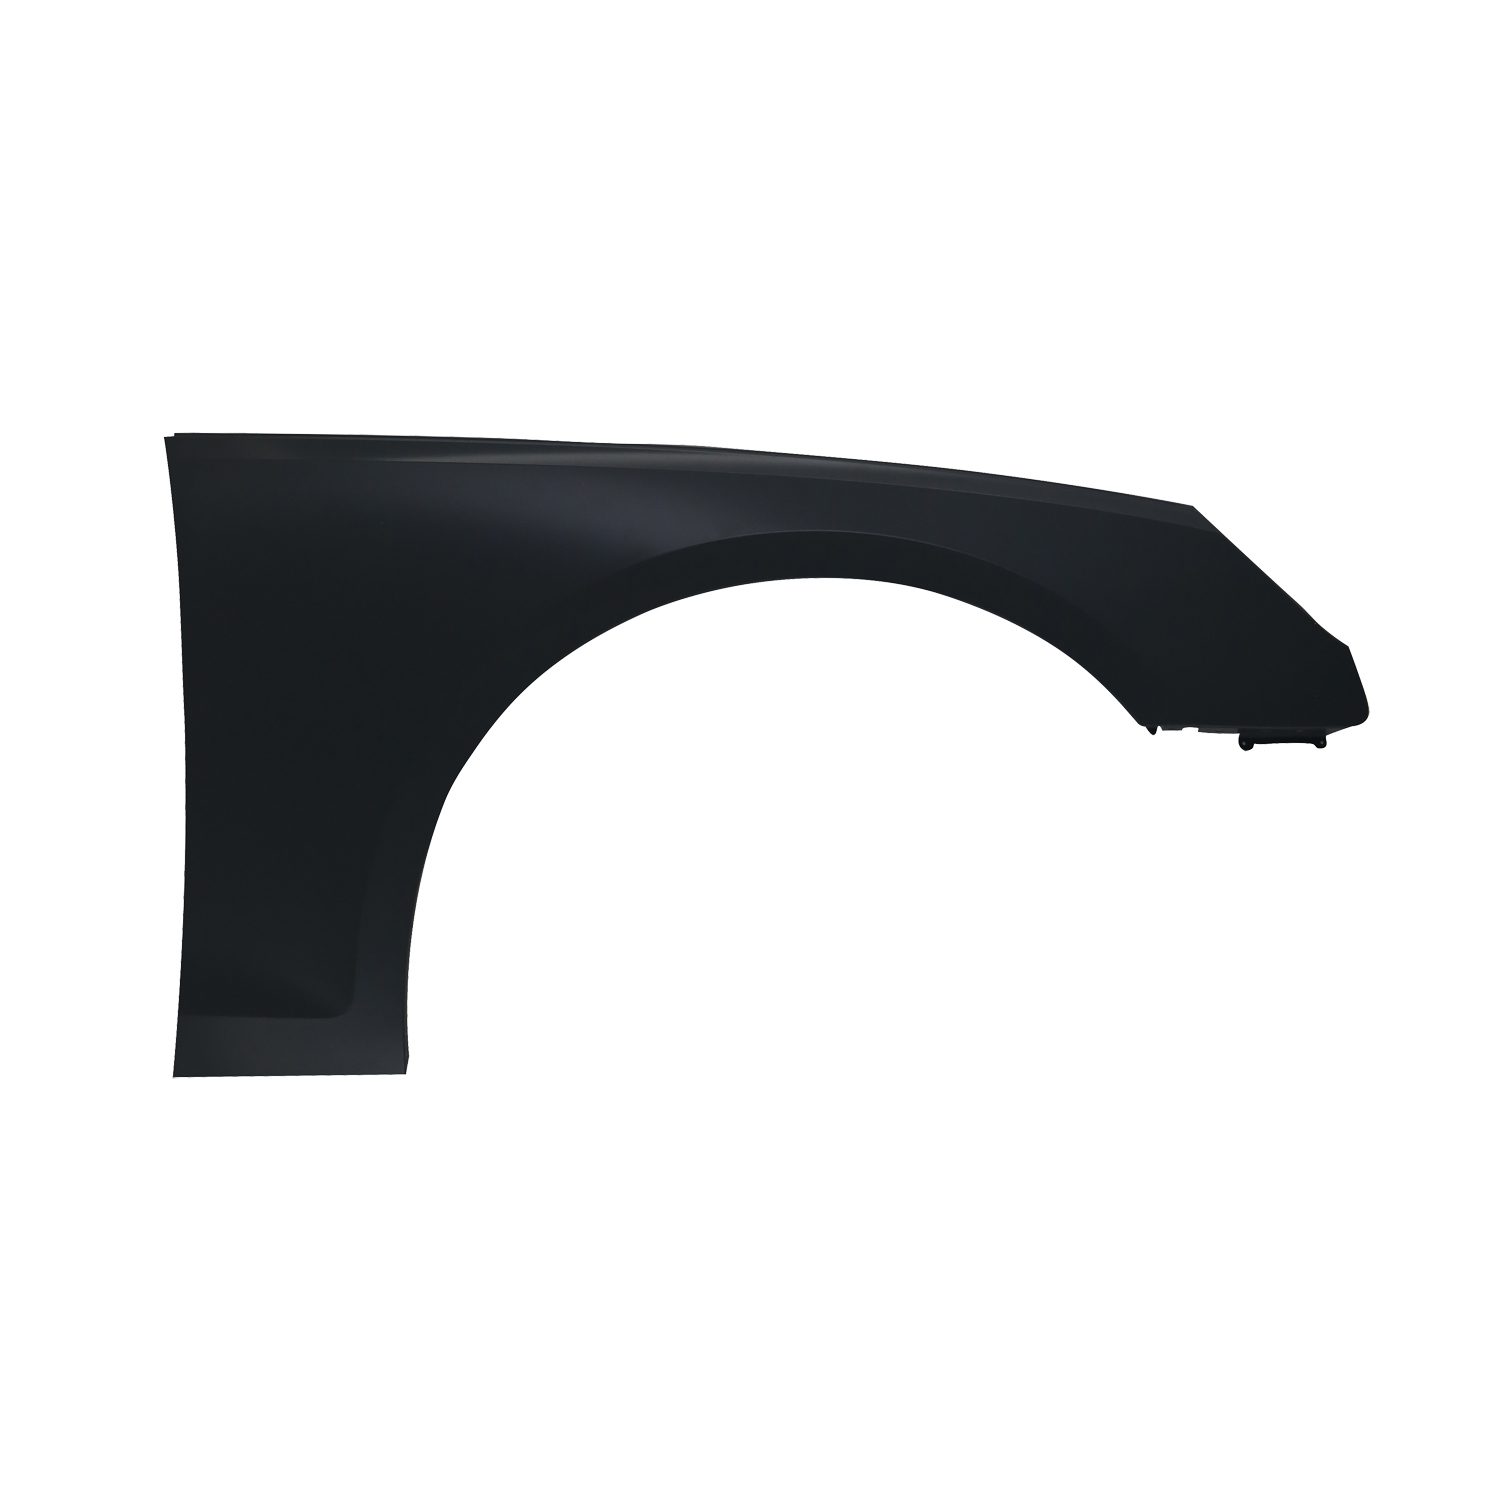 Aftermarket FENDERS for AUDI - A4 QUATTRO, A4 QUATTRO,20-21,RT Front fender assy